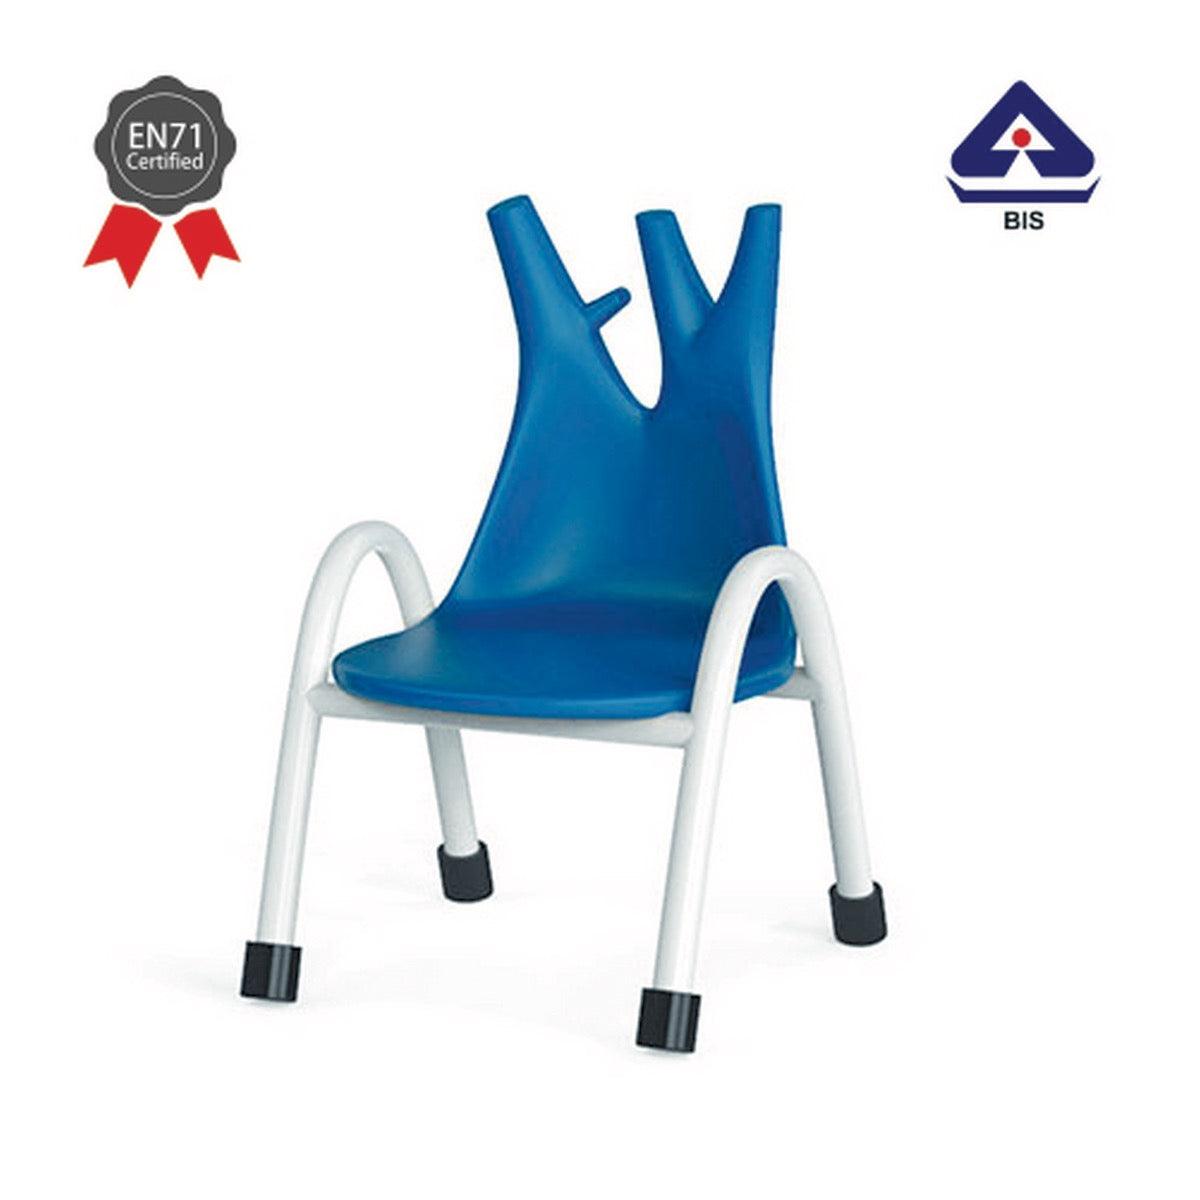 Ok Play Trunk Chair, Study Chair, Sturdy And Durable Chair, Plastic Chair, Perfect For Home, Creches And School, Blue, 5 to 10 Years, Height 10 Inches